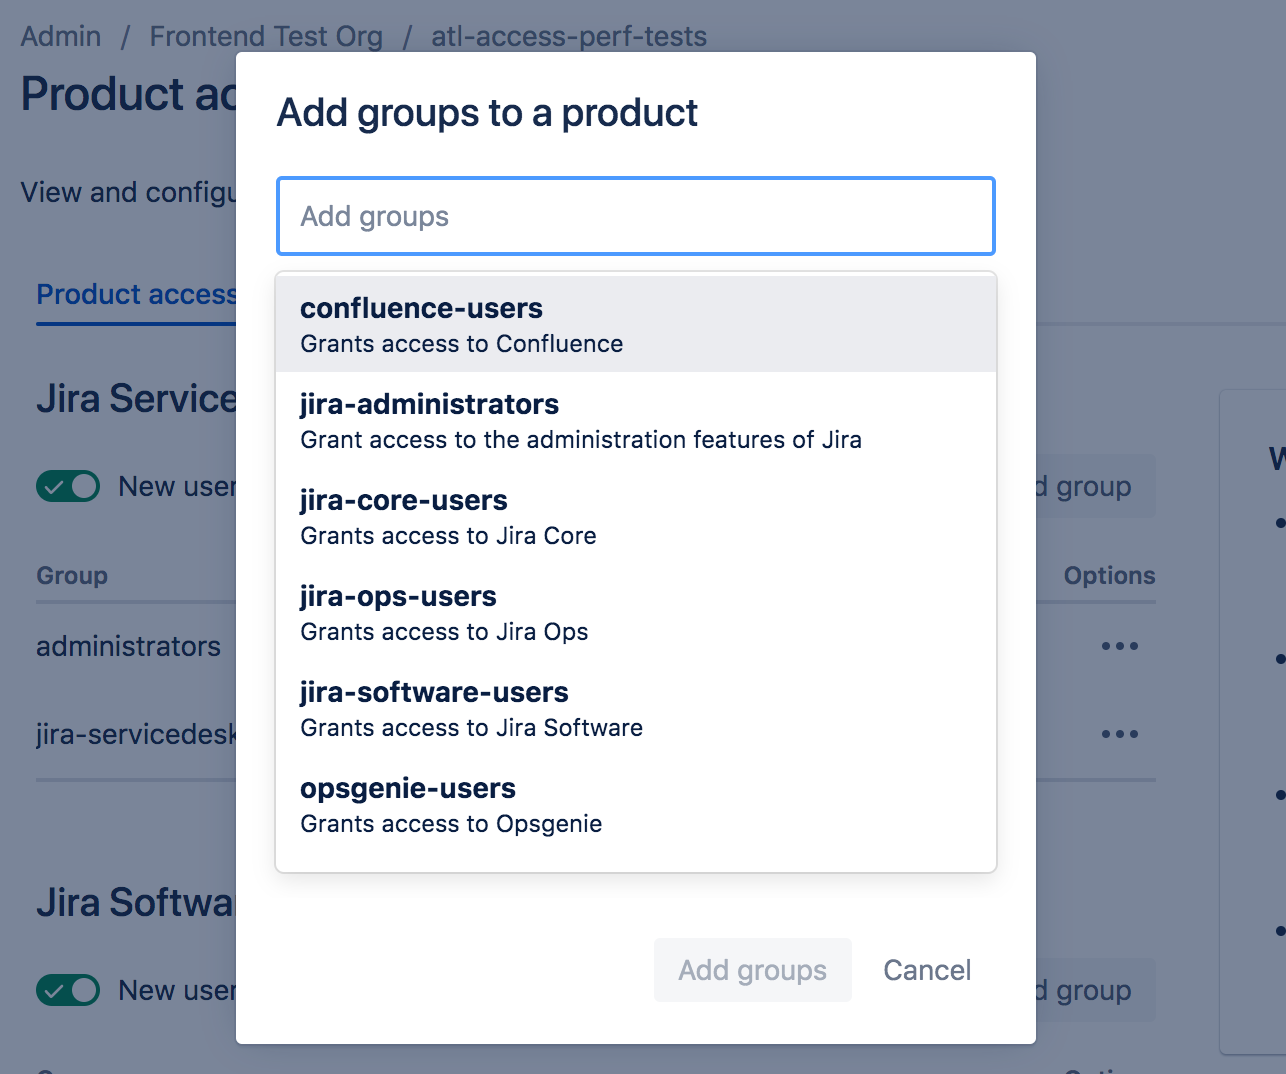 Add groups to a product - with an option to select a group from a list or to enter the group name. 